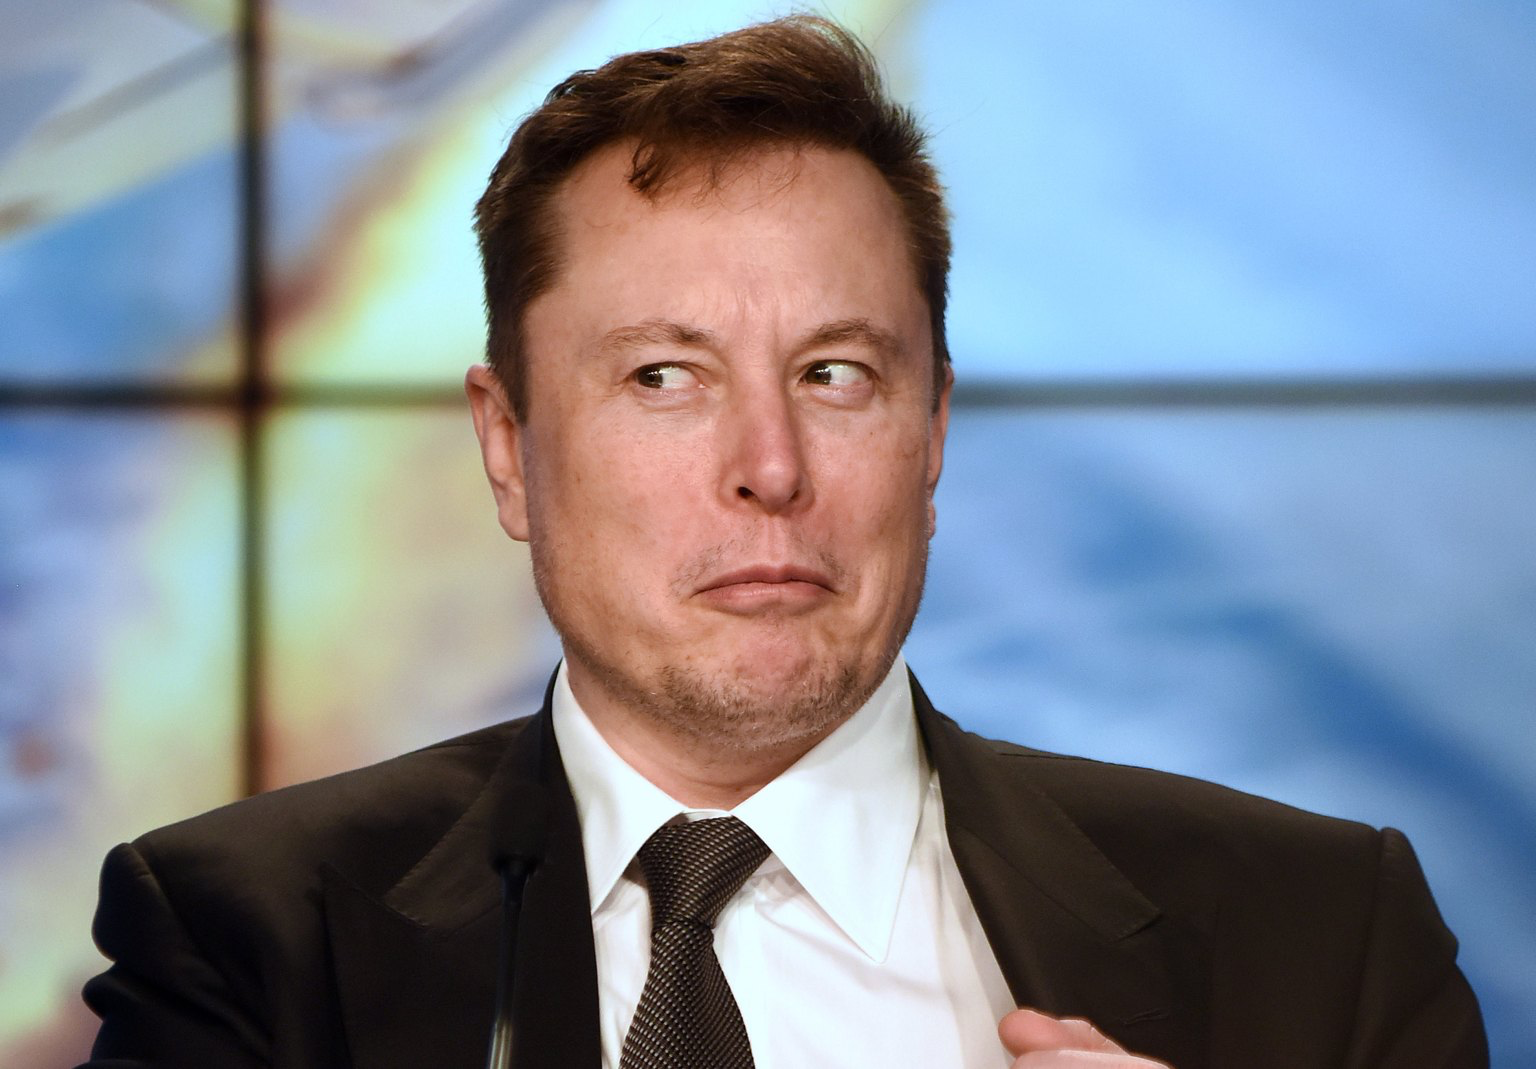 tesla stock is there a forming of new bubble